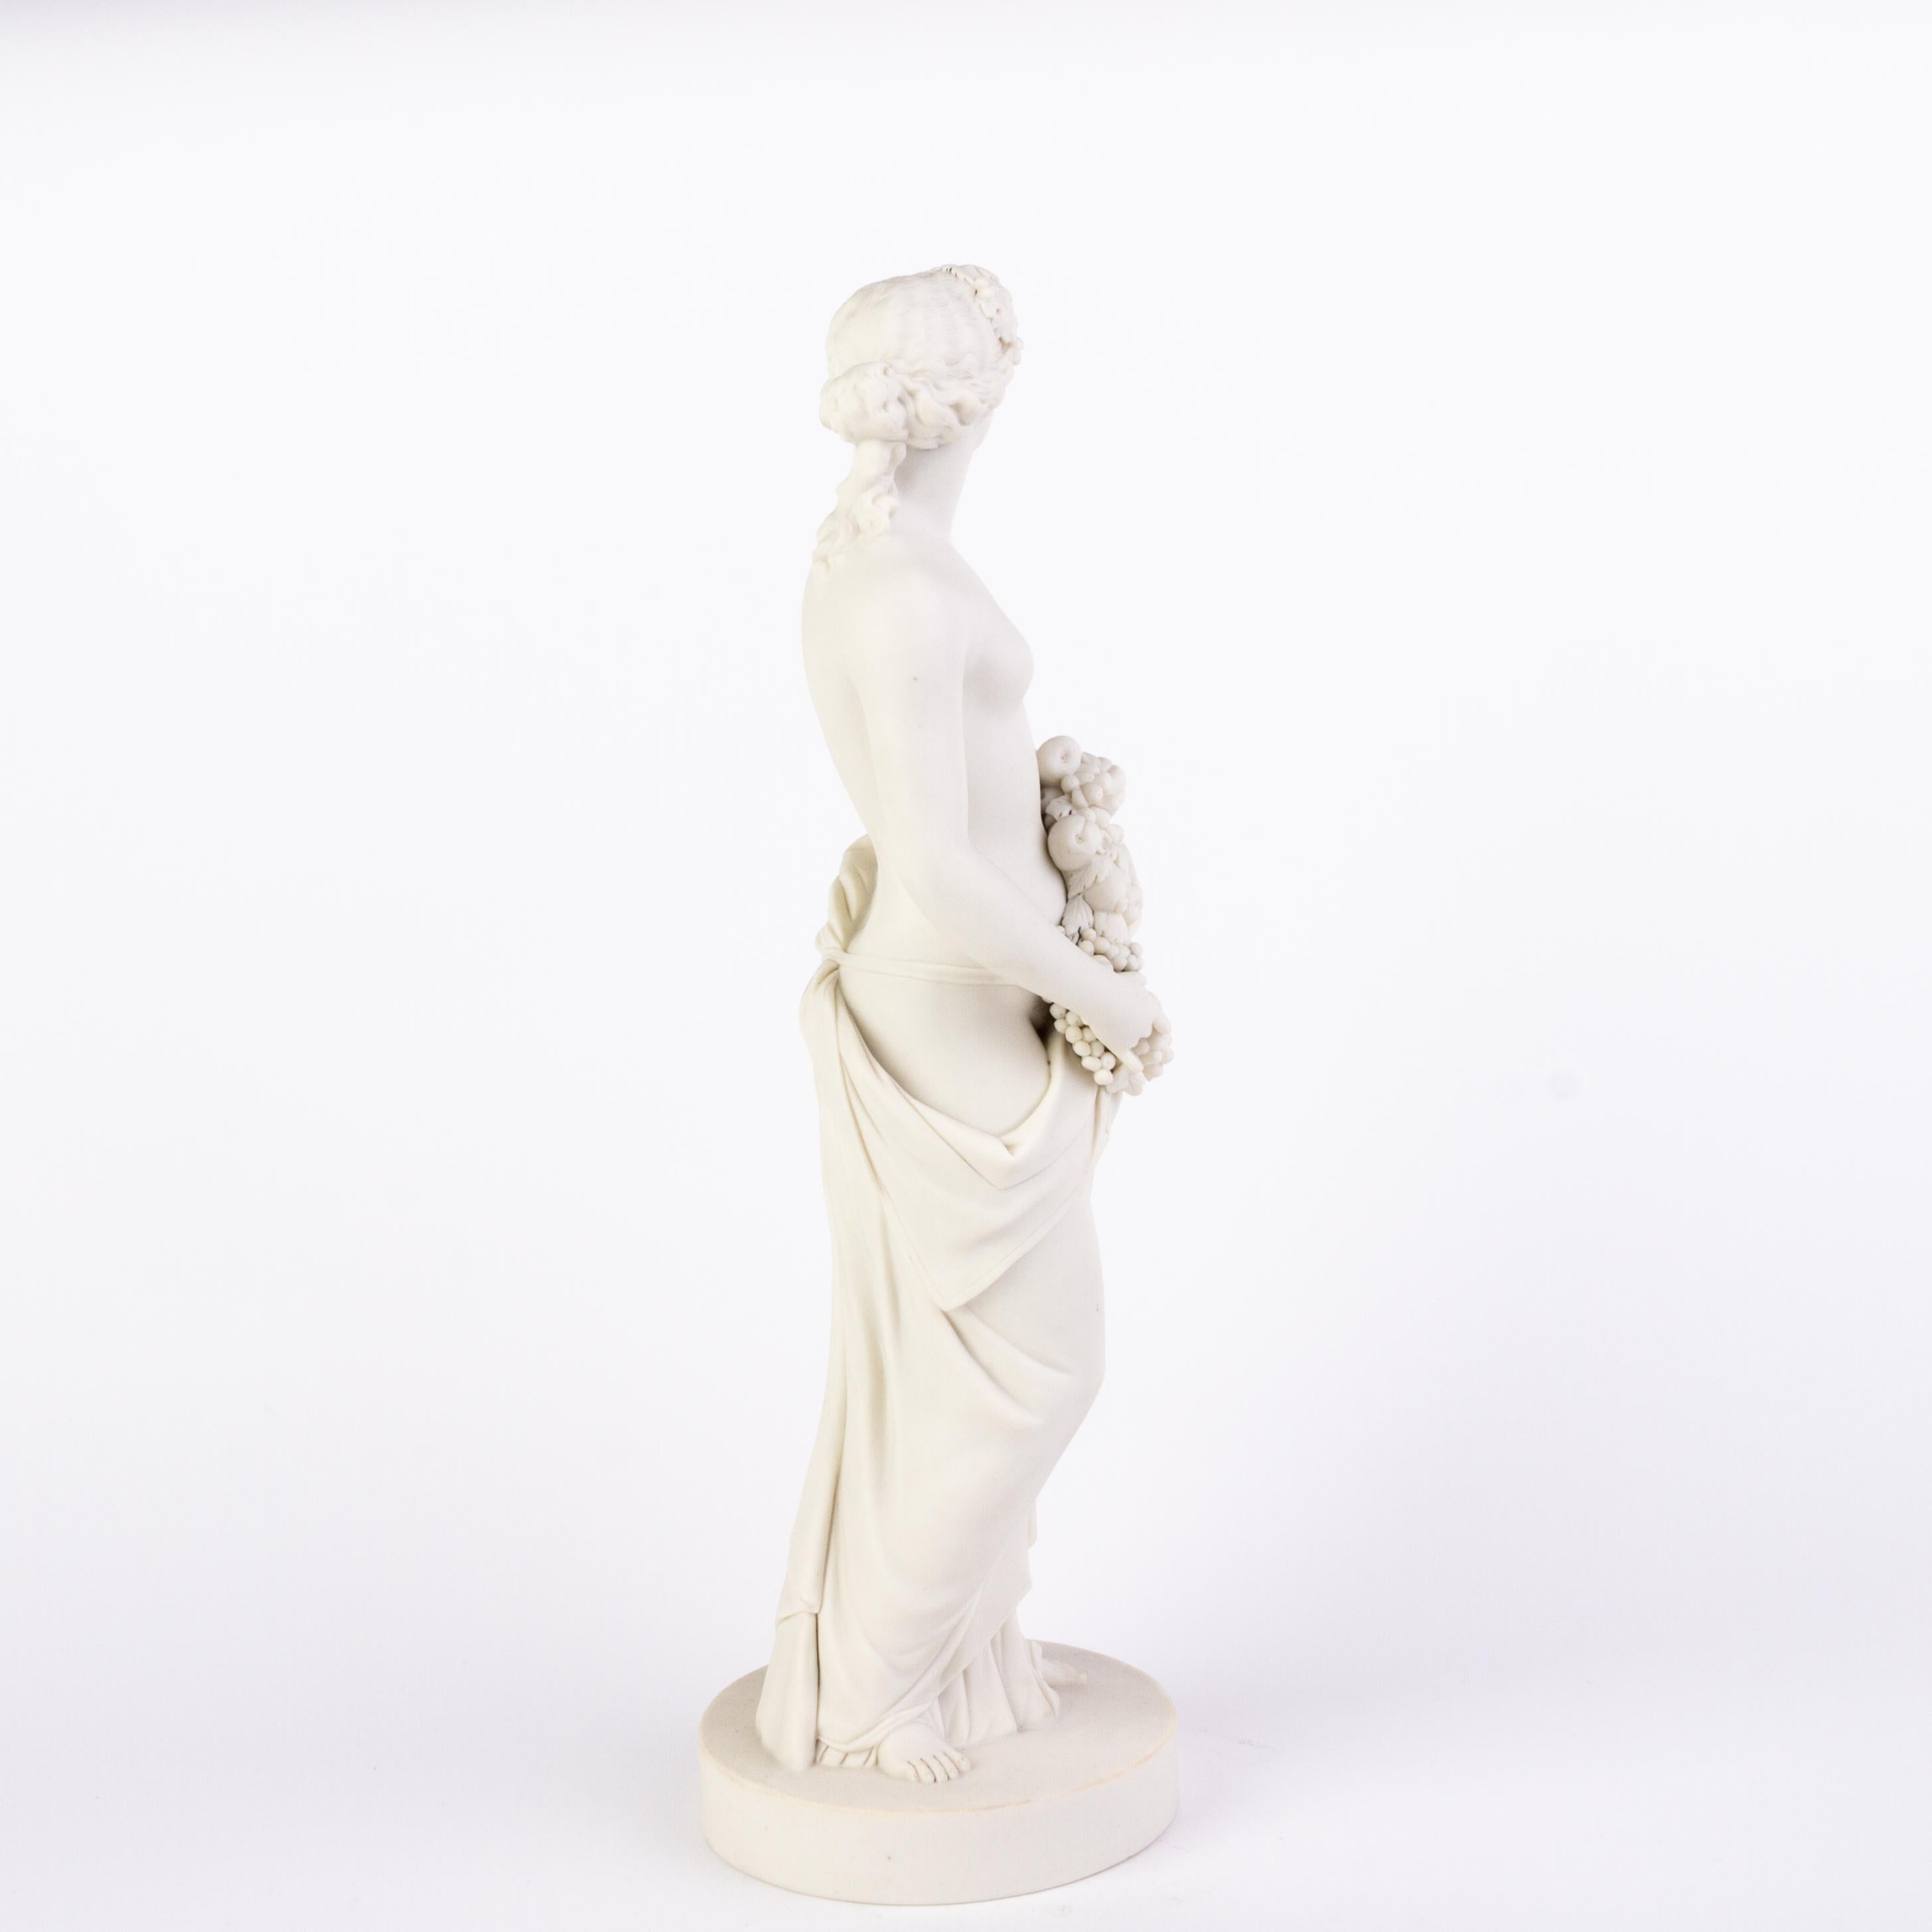 Victorian English Copeland Parian Ware Statue of Spring 19th Century
Good condition
From a private collection.
Free international shipping.